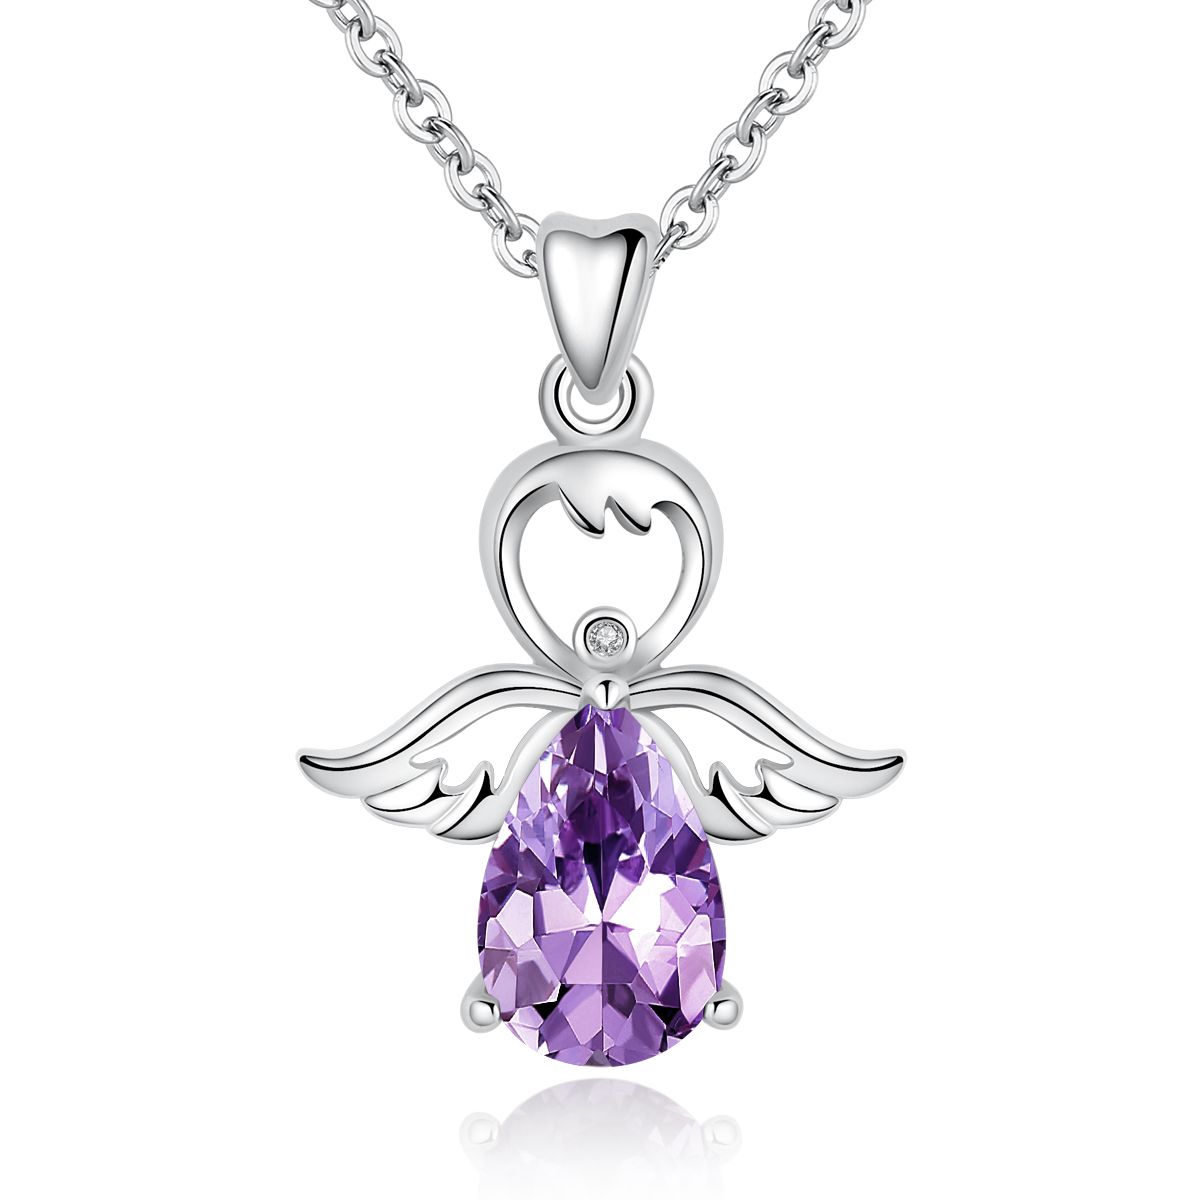 Fashion choker cz crystal sterling silver jewelry angel necklace